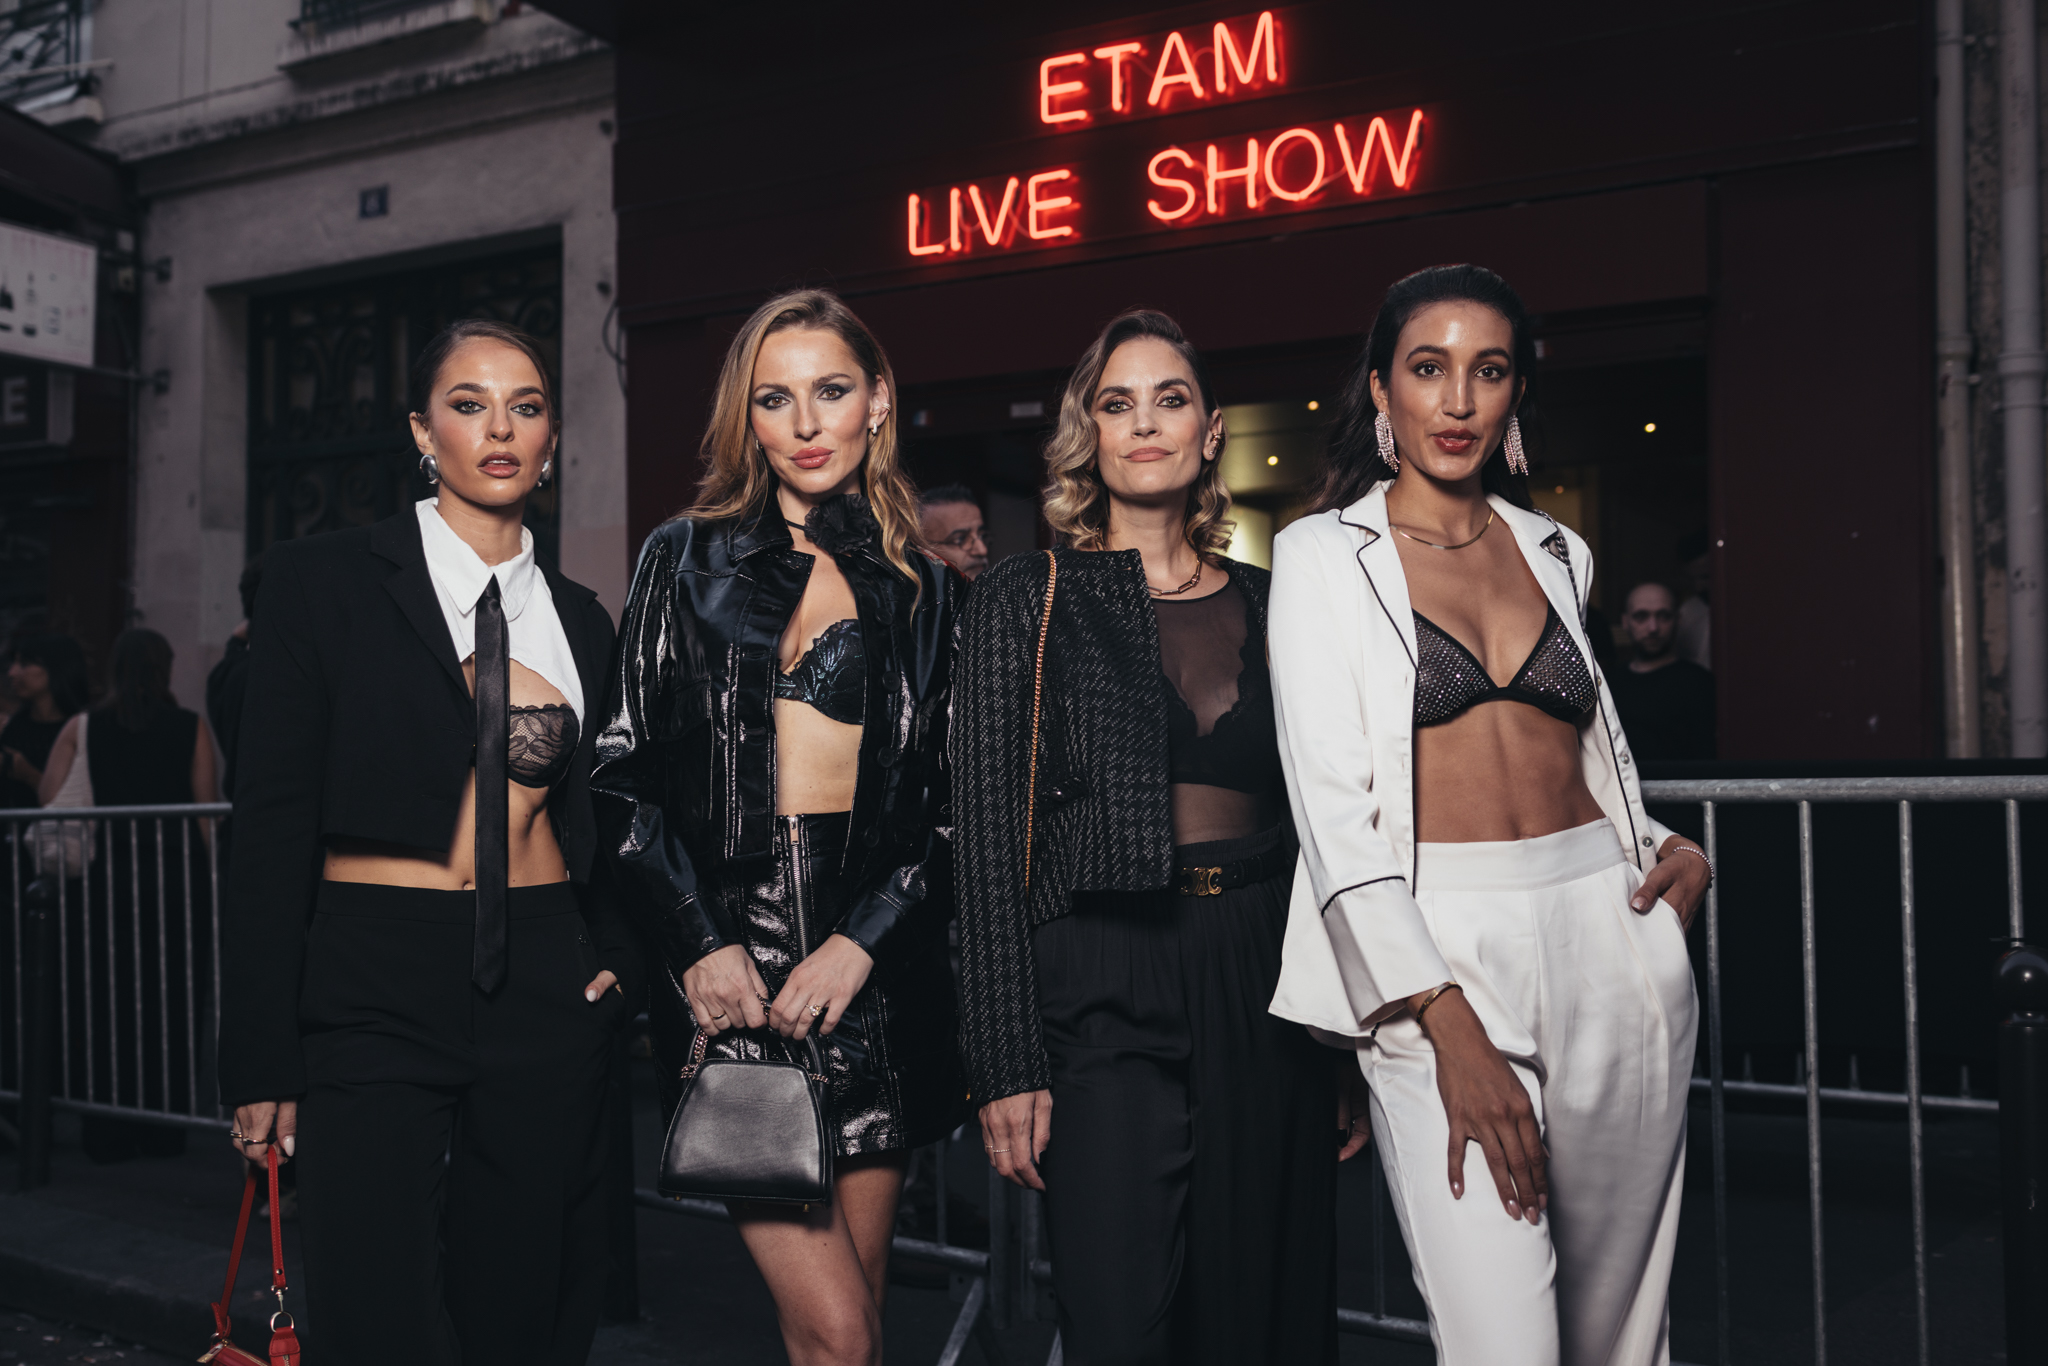 Etam's 80s-Inspired Extravaganza: A Dazzling Etam Live Show 2023 in Paris during PFW. Insights from the trip to Paris with the Swiss Ambassadors Team. 2